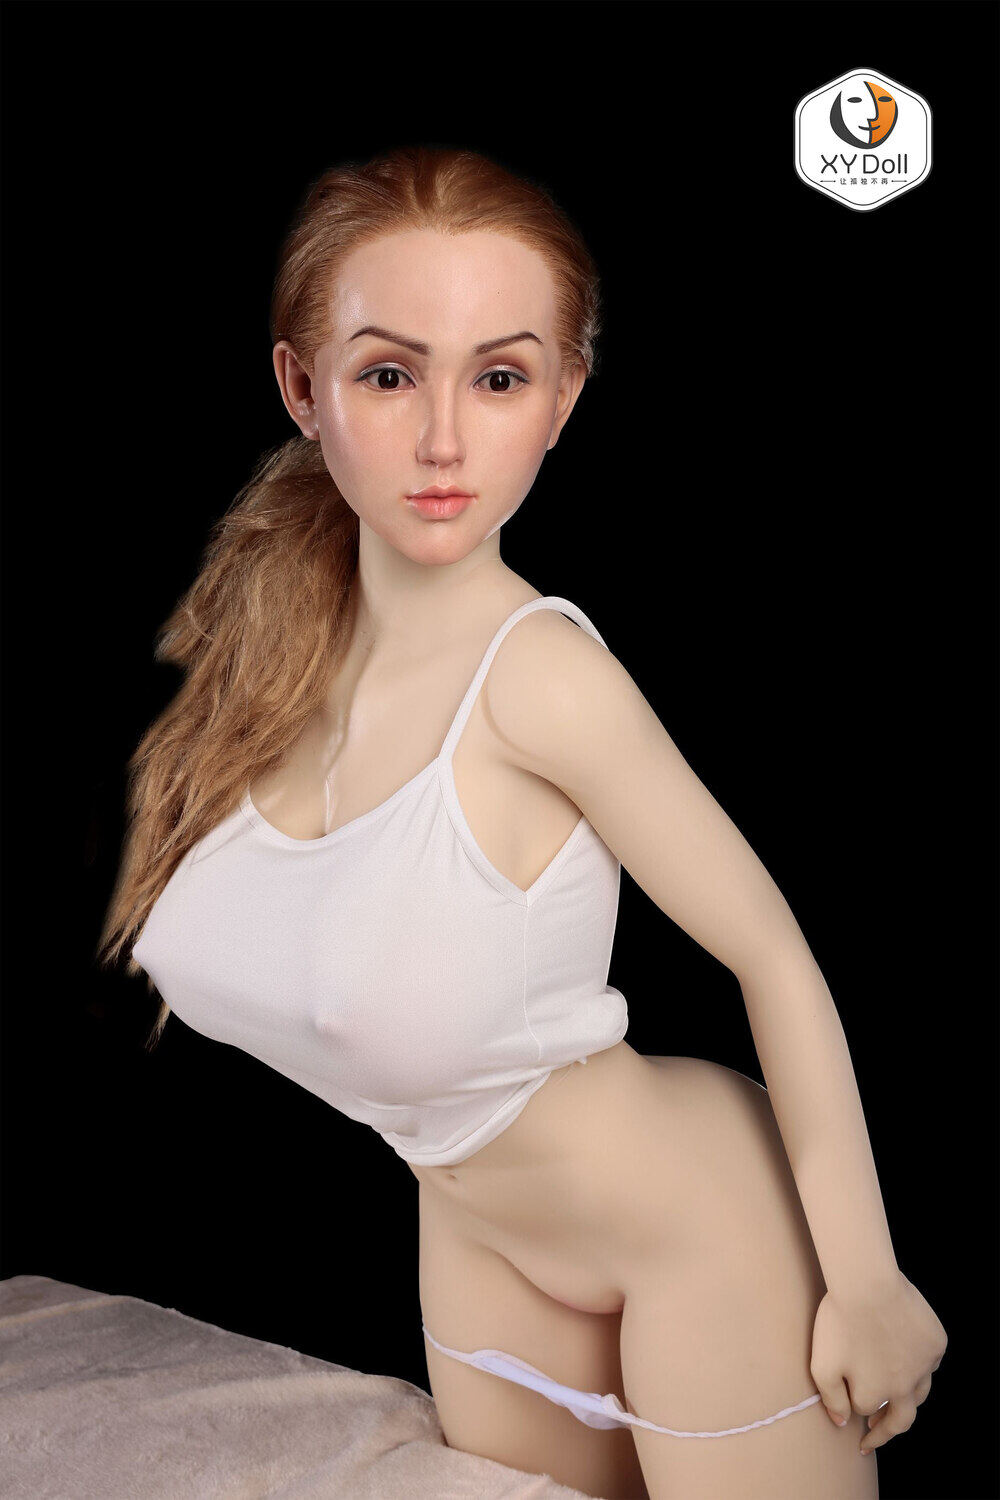 Cassi - I-Cup Sex Doll XY 161cm(5ft3) Love Dolls image1